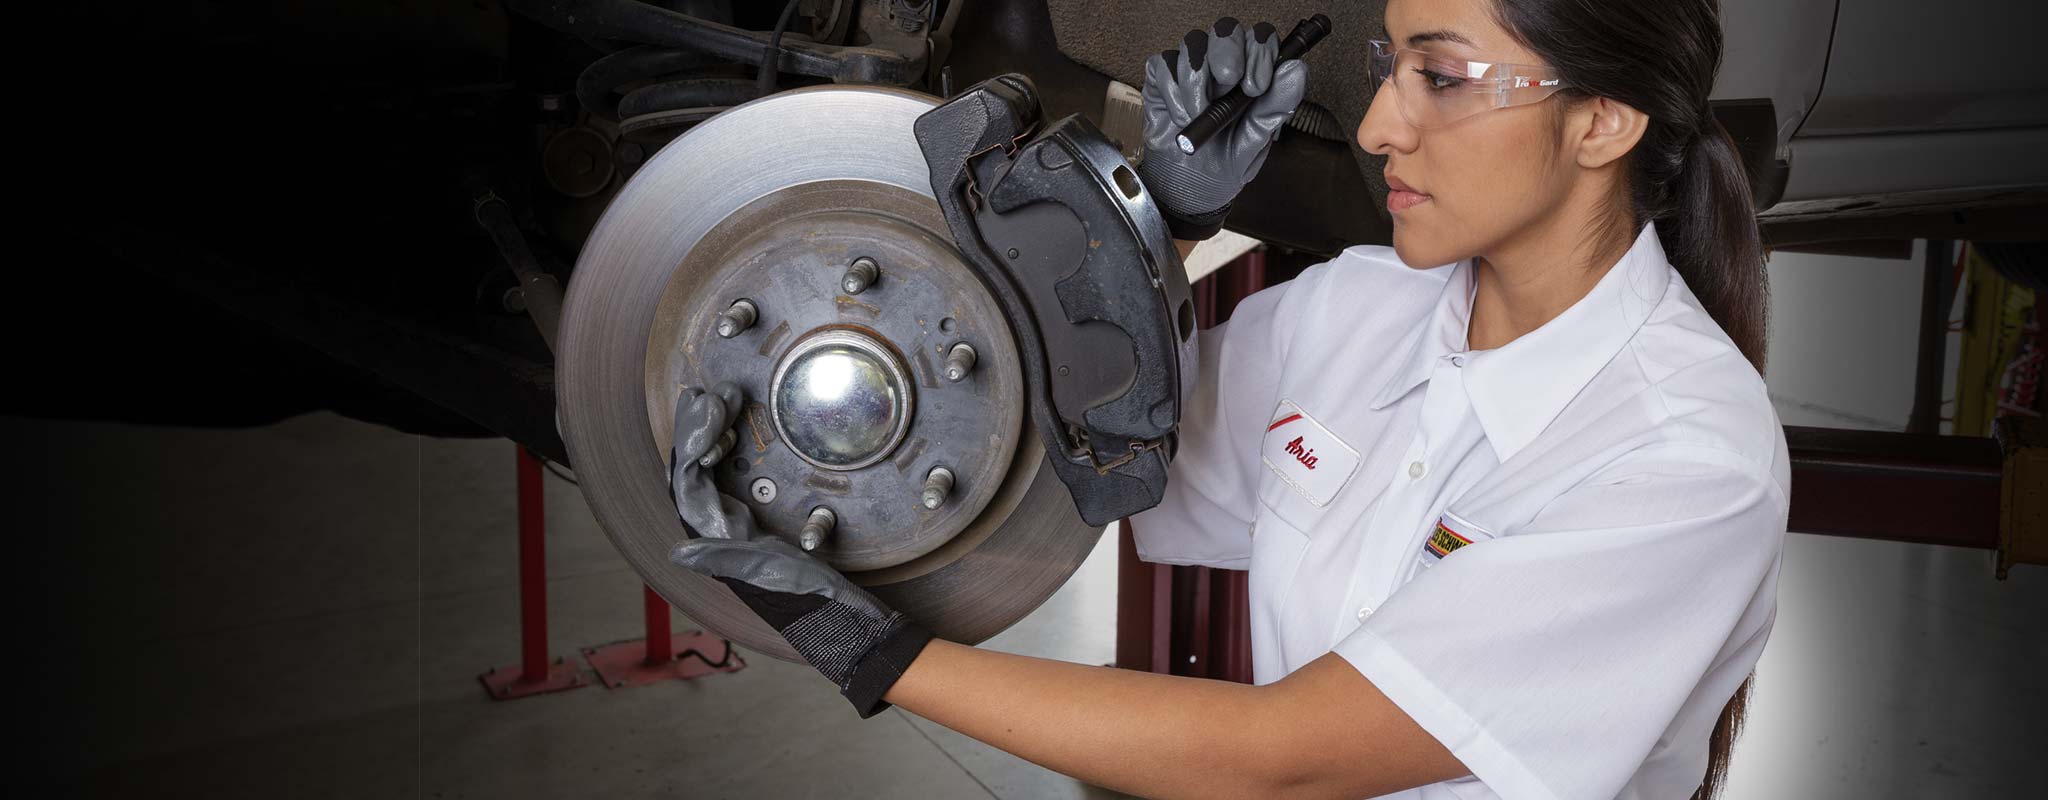 A Les Schwab technician inspecting a vehicle's brakes with a flashlight and protective glasses